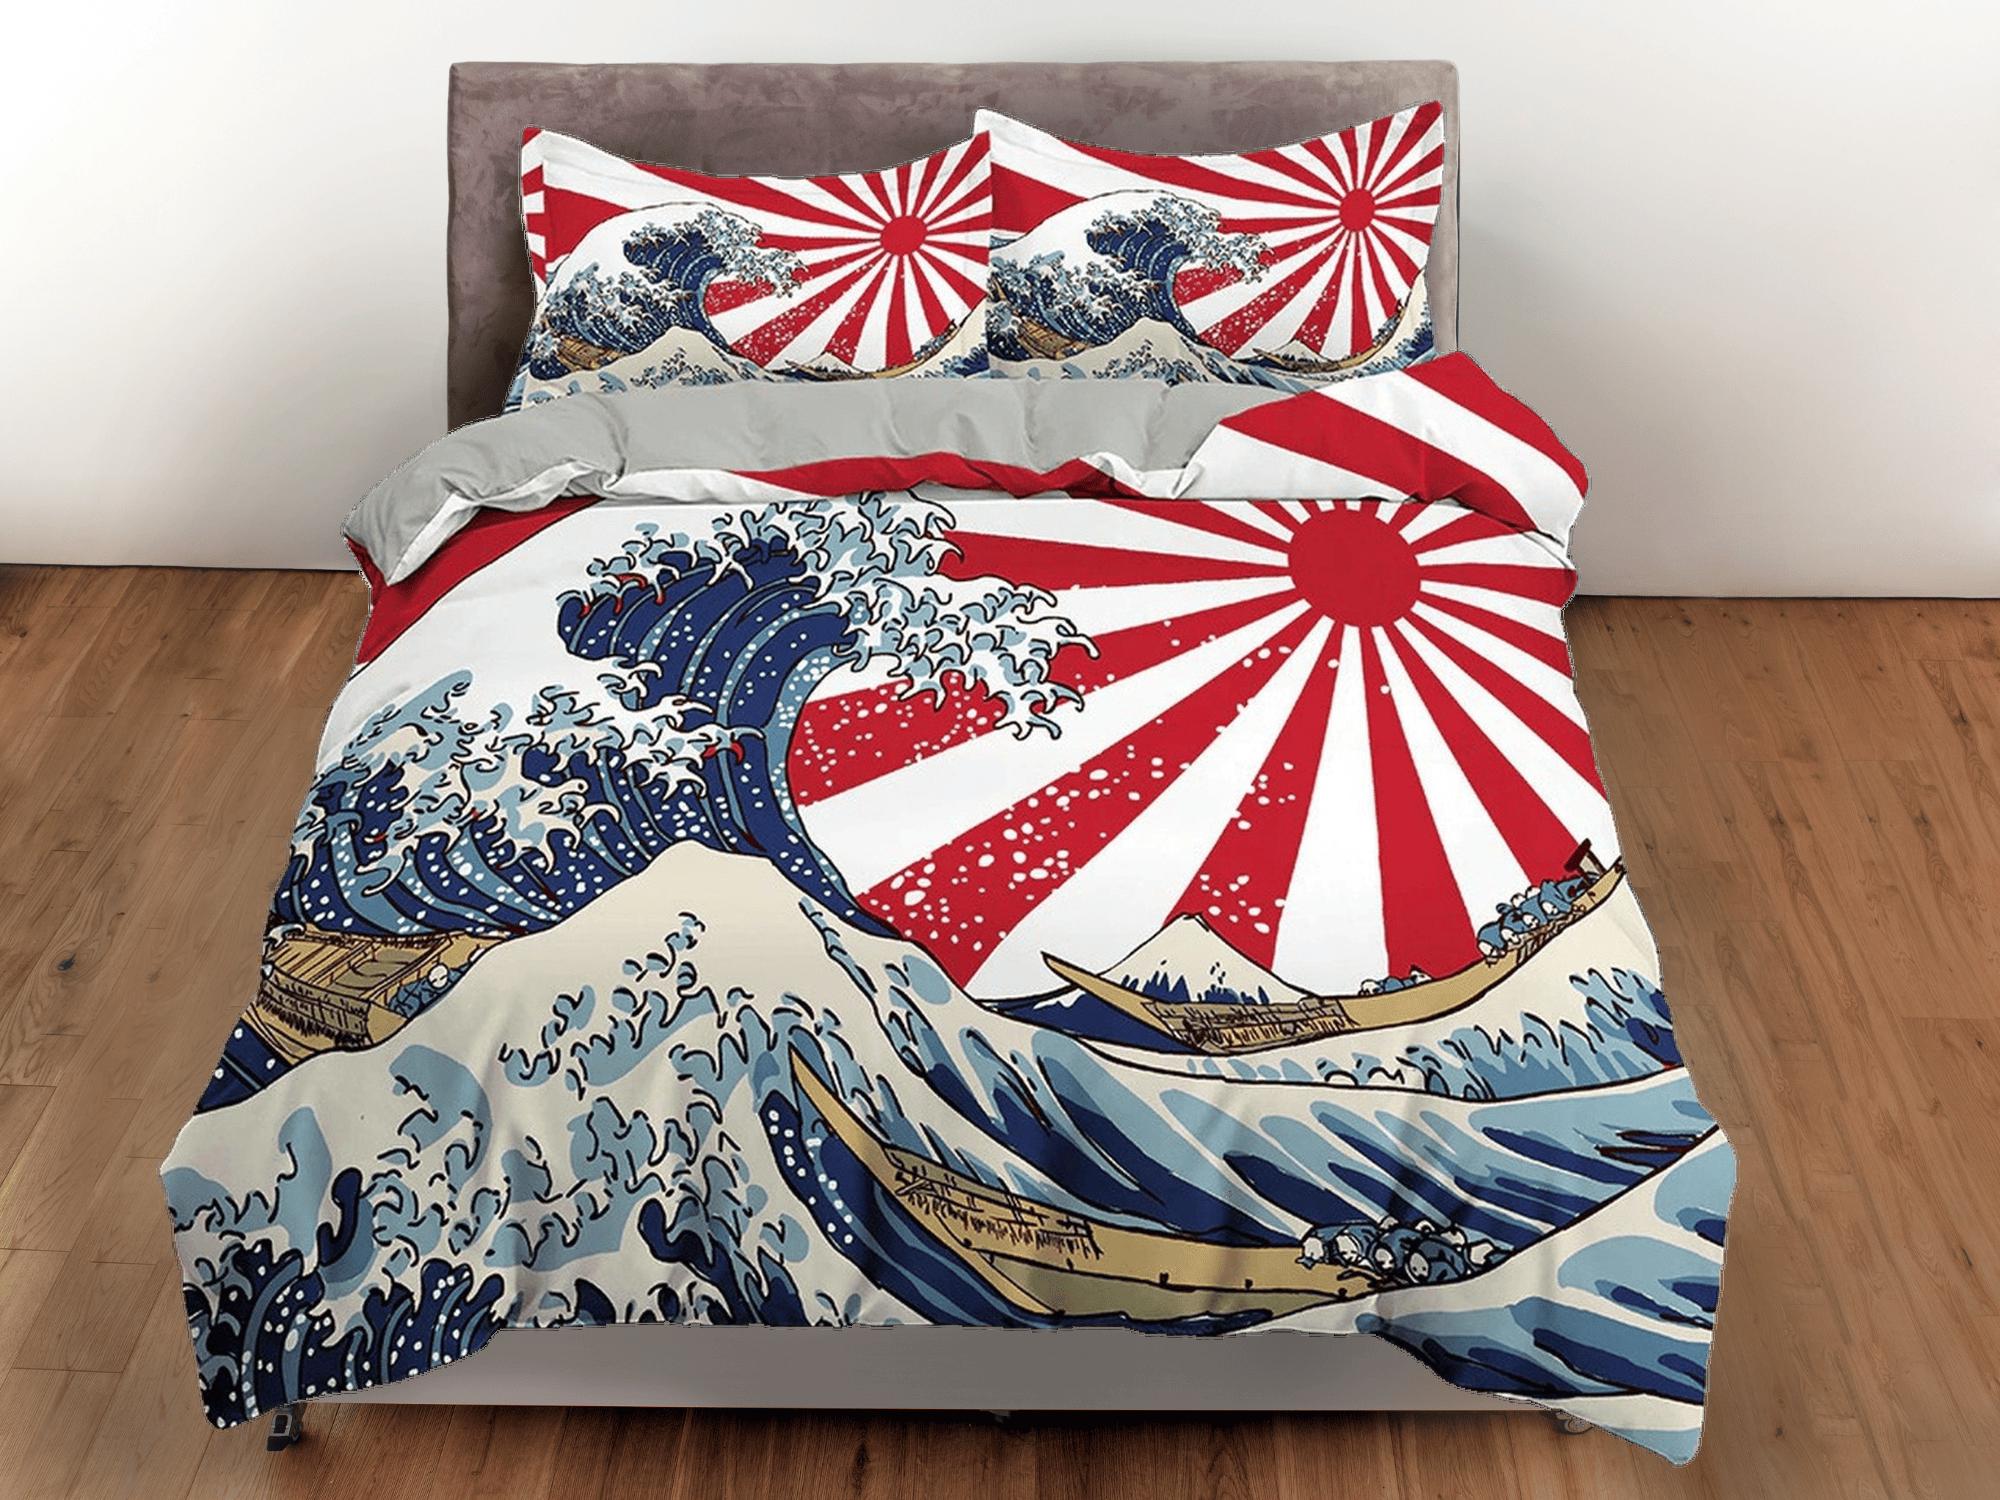 daintyduvet Great Wave Bedding, Japanese Bedding, Japan Old Flag, Oriental Bed Coverlet, Aesthetic Red Duvet Cover King Queen Full Twin Double Single